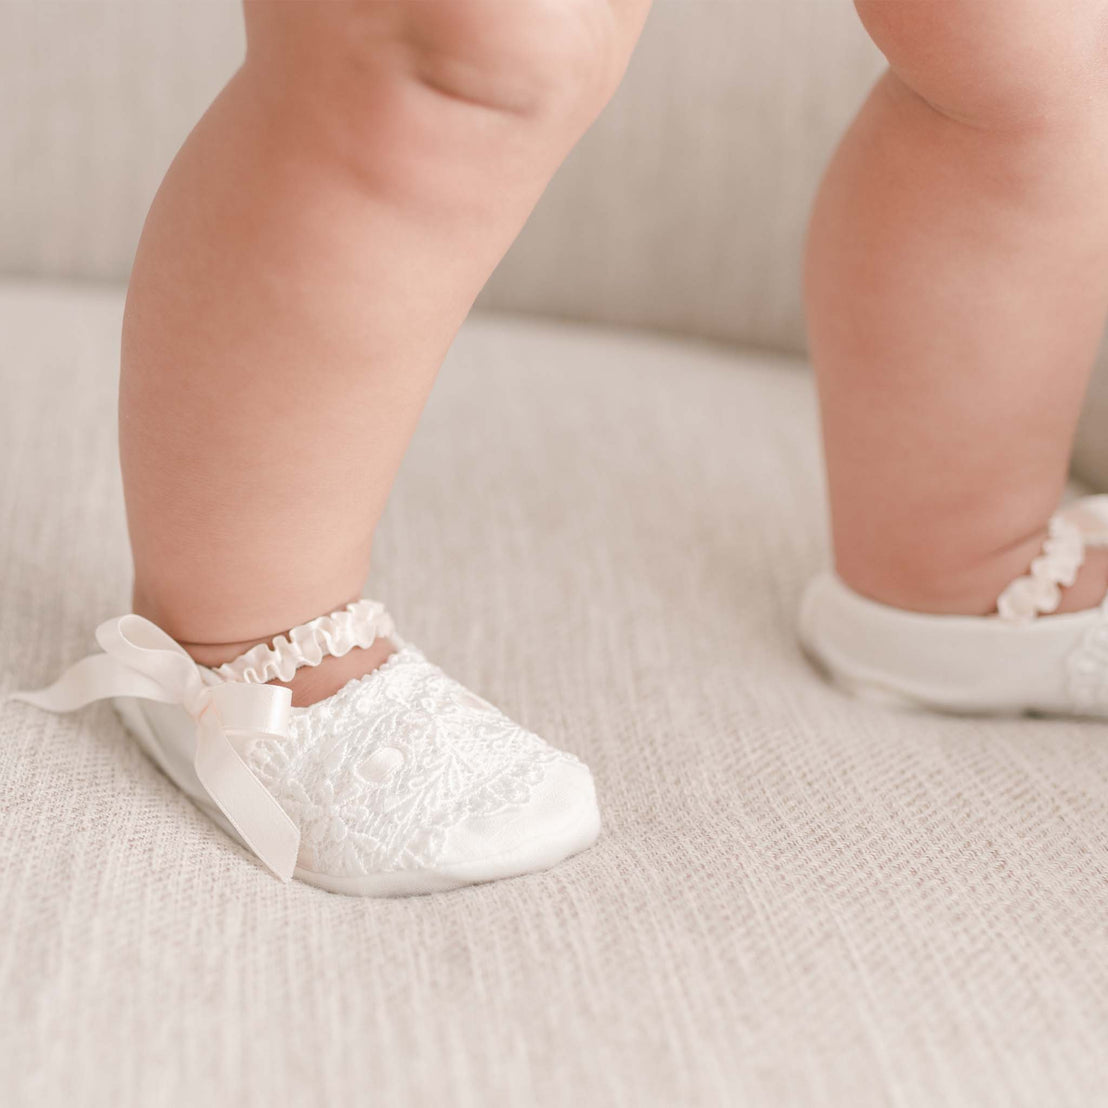 Close-up of a newborn's feet in white, lace-trimmed Emma baby shoes with ribbon details, standing on a soft, beige surface.